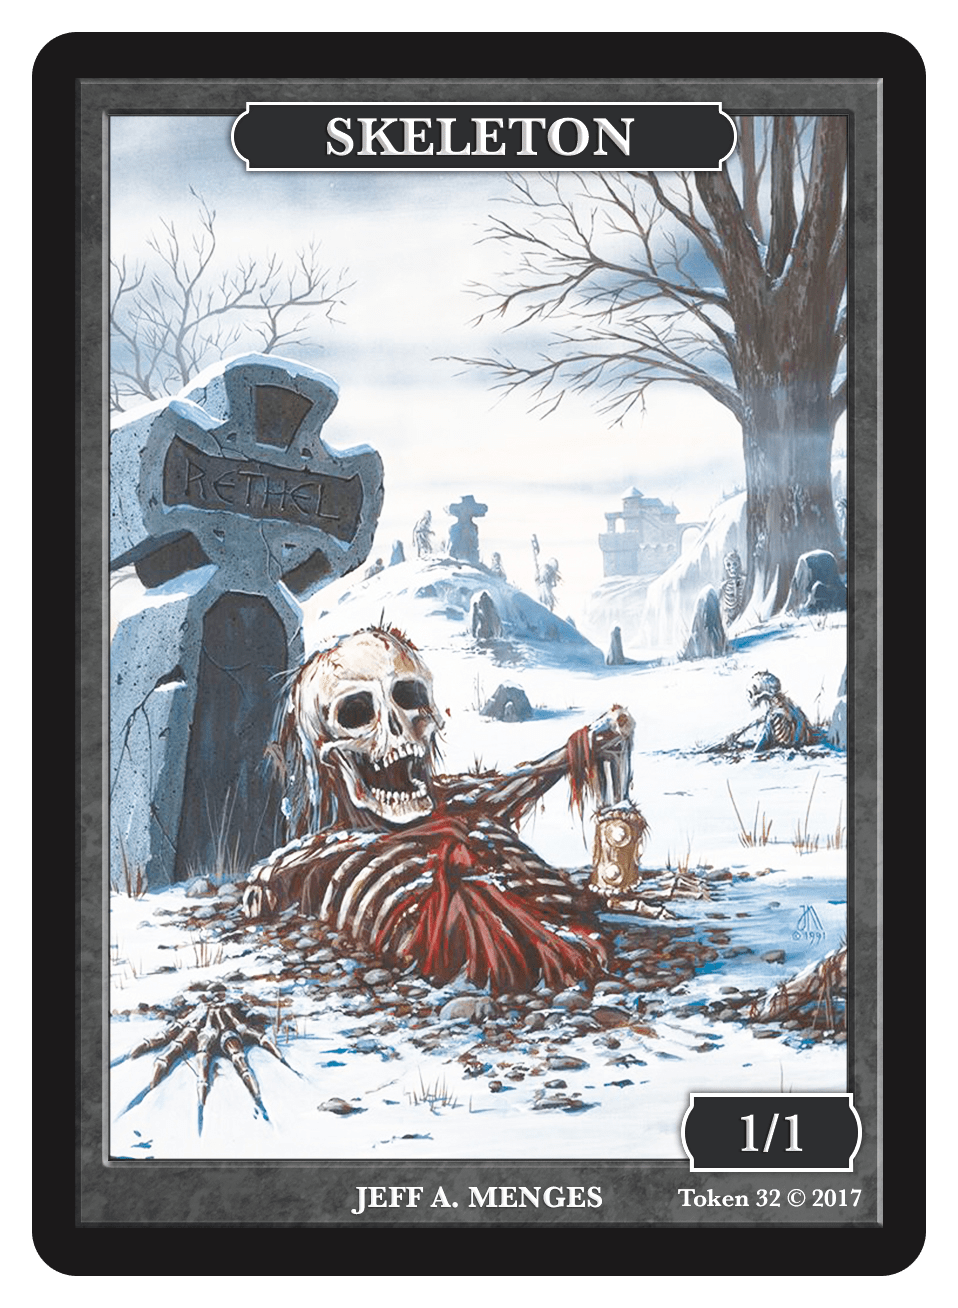 Skeleton Token (1/1) by Jeff A. Menges - Token - Original Magic Art - Accessories for Magic the Gathering and other card games